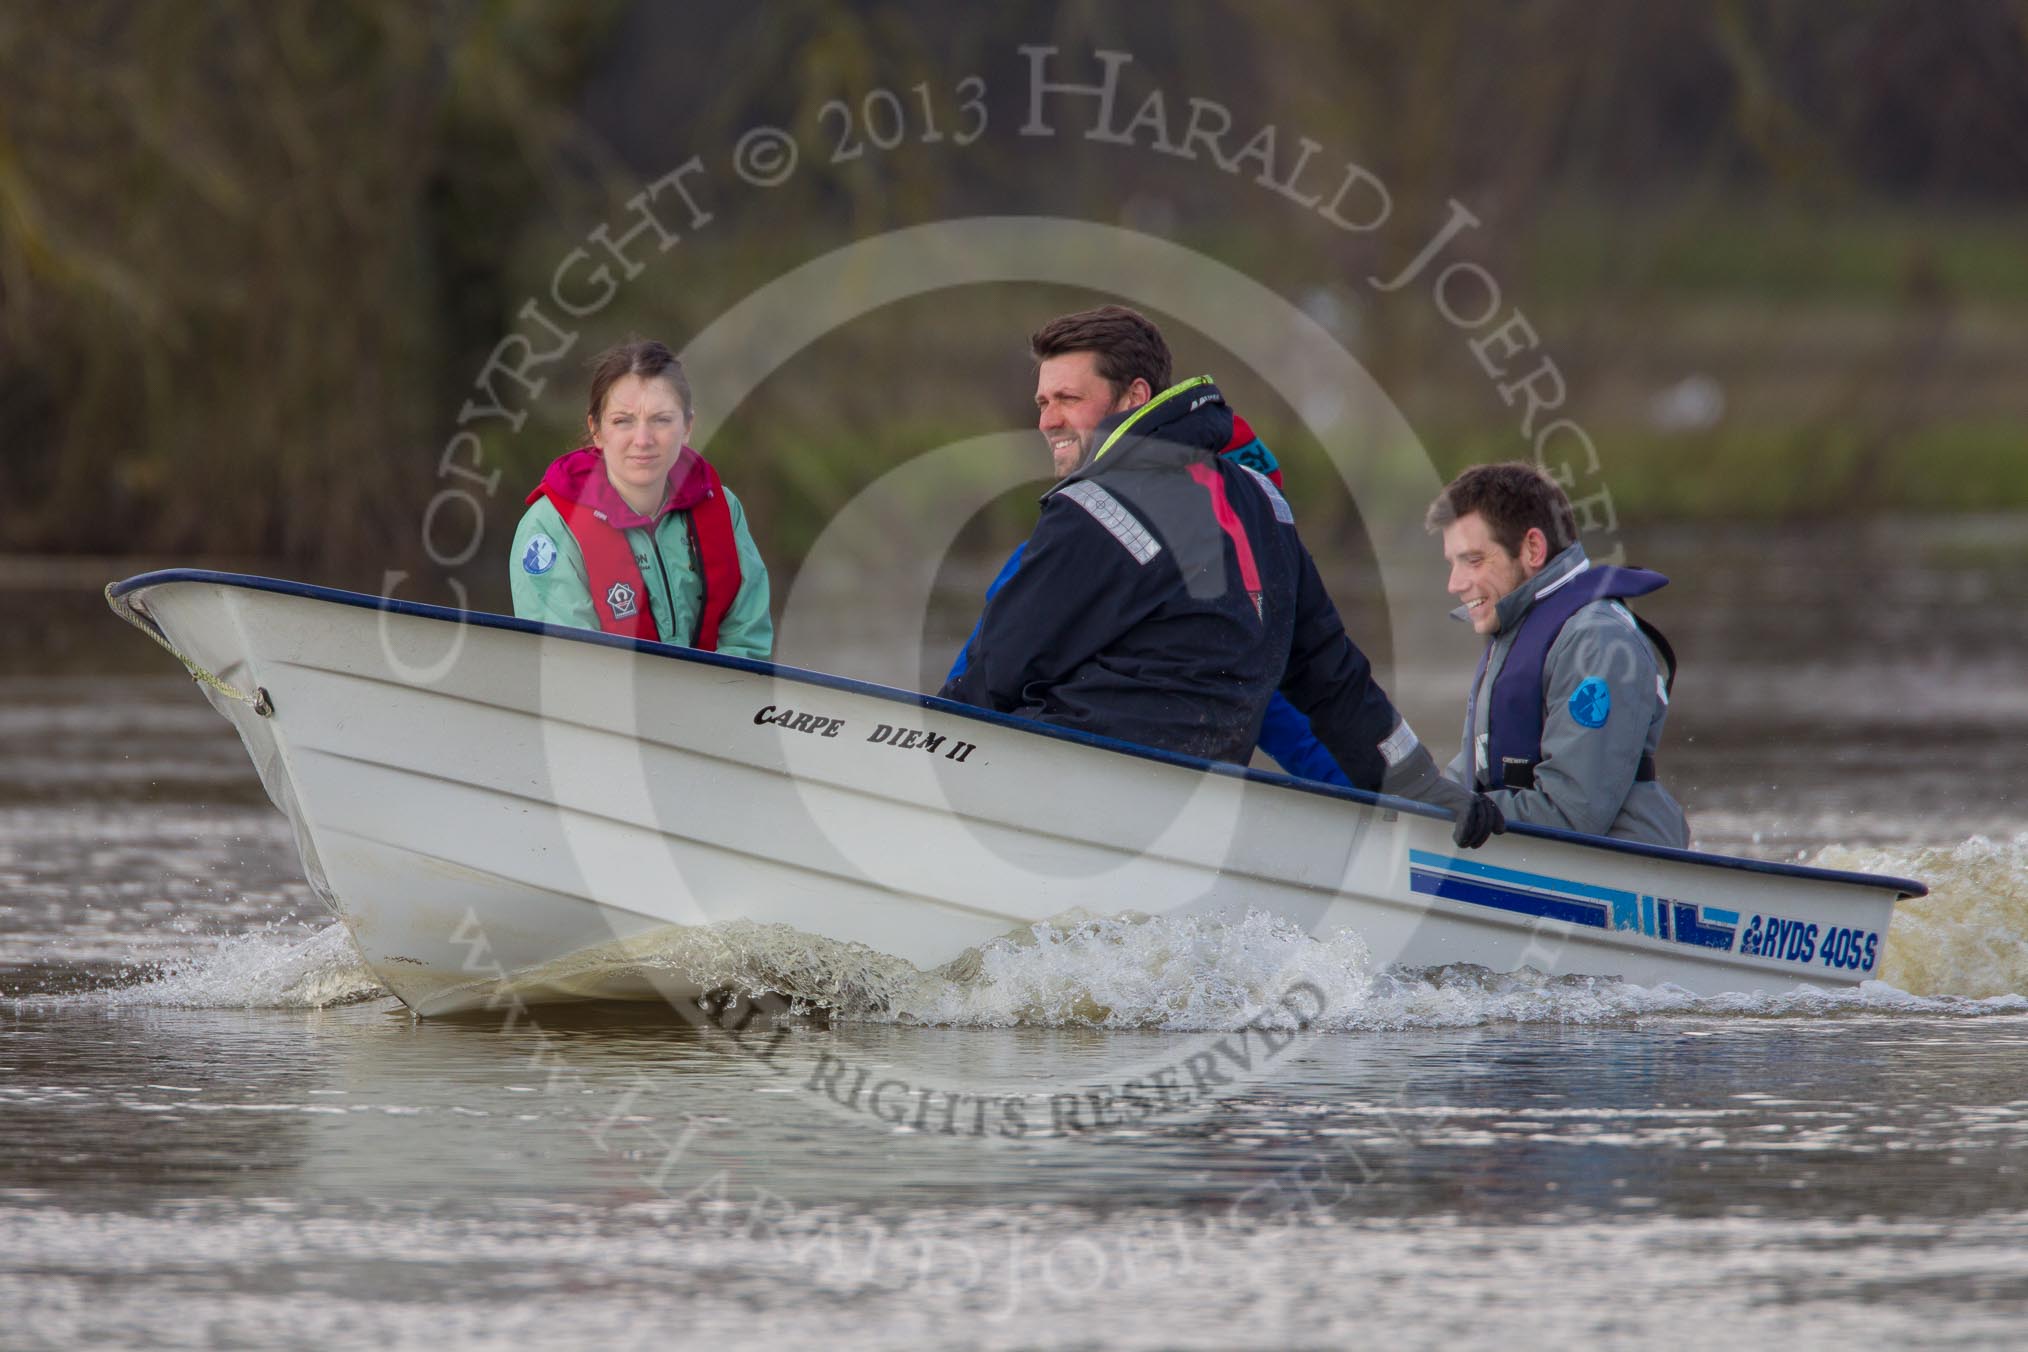 The Boat Race season 2013 - CUWBC training: The CUWBC coaching team checking the river conditions before the start of the training session..
River Thames near Remenham,
Henley-on-Thames,
Oxfordshire,
United Kingdom,
on 19 March 2013 at 14:01, image #8